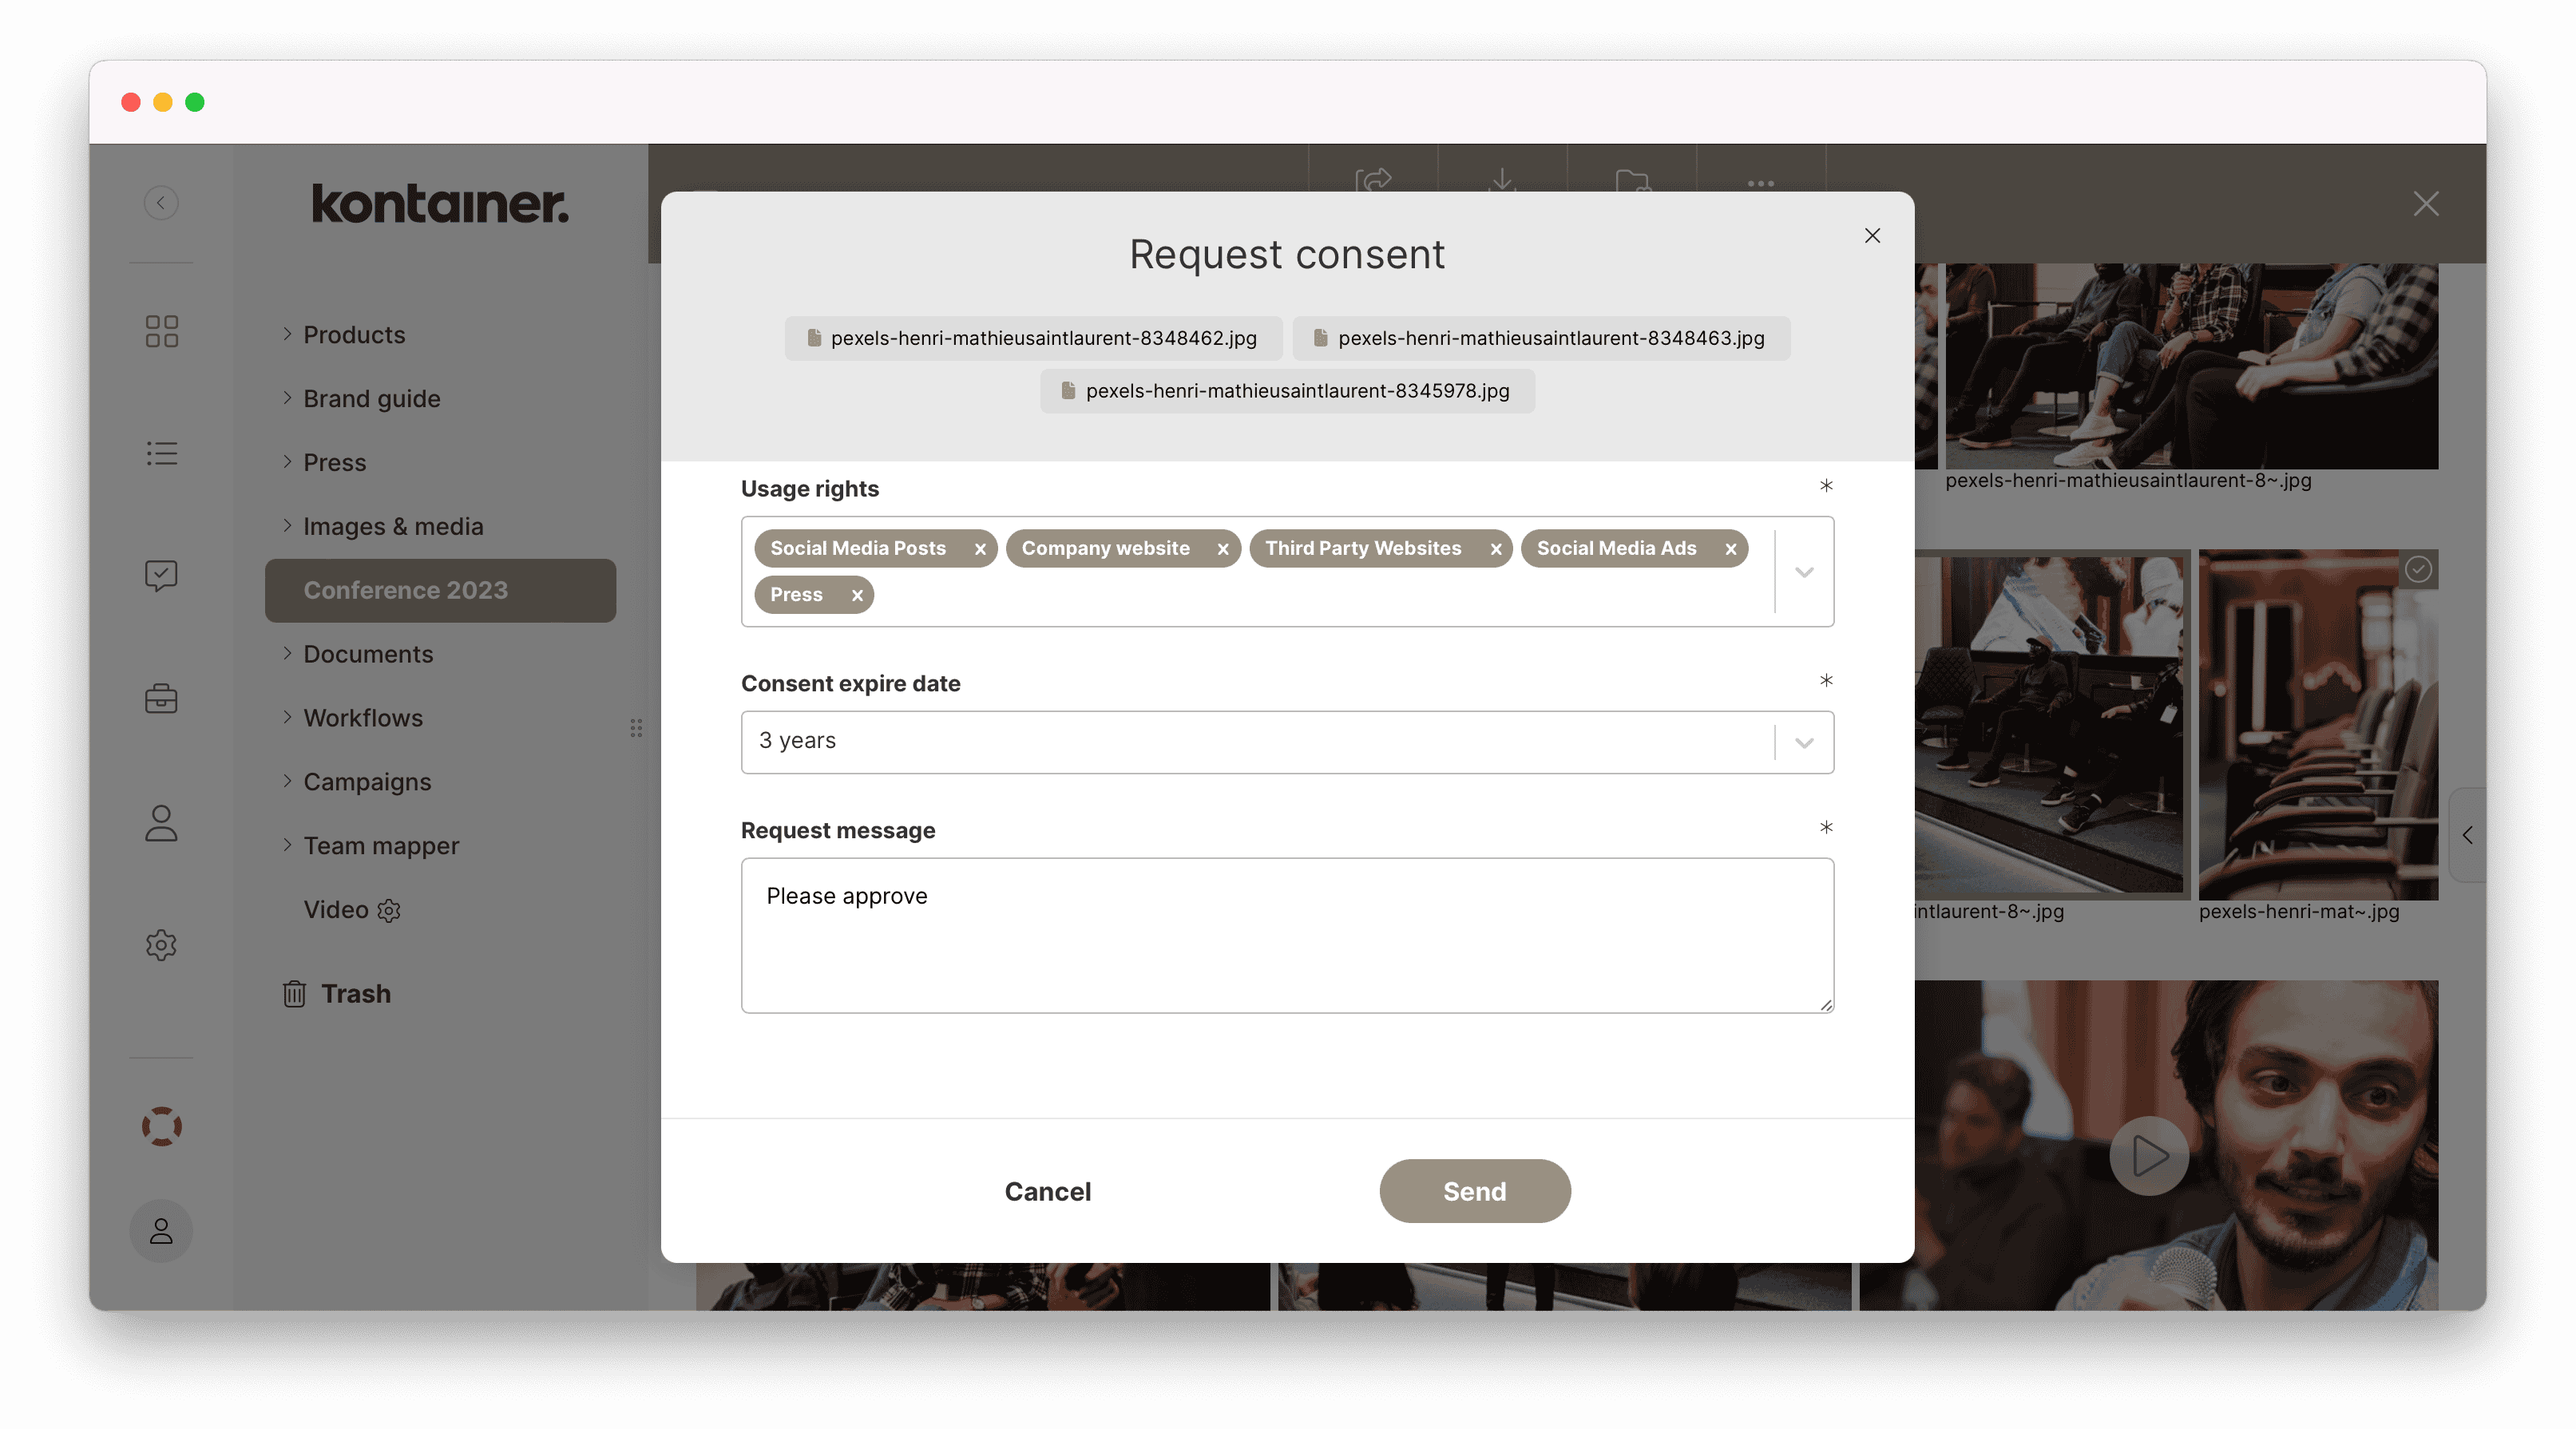 Pop-up form for requesting consent